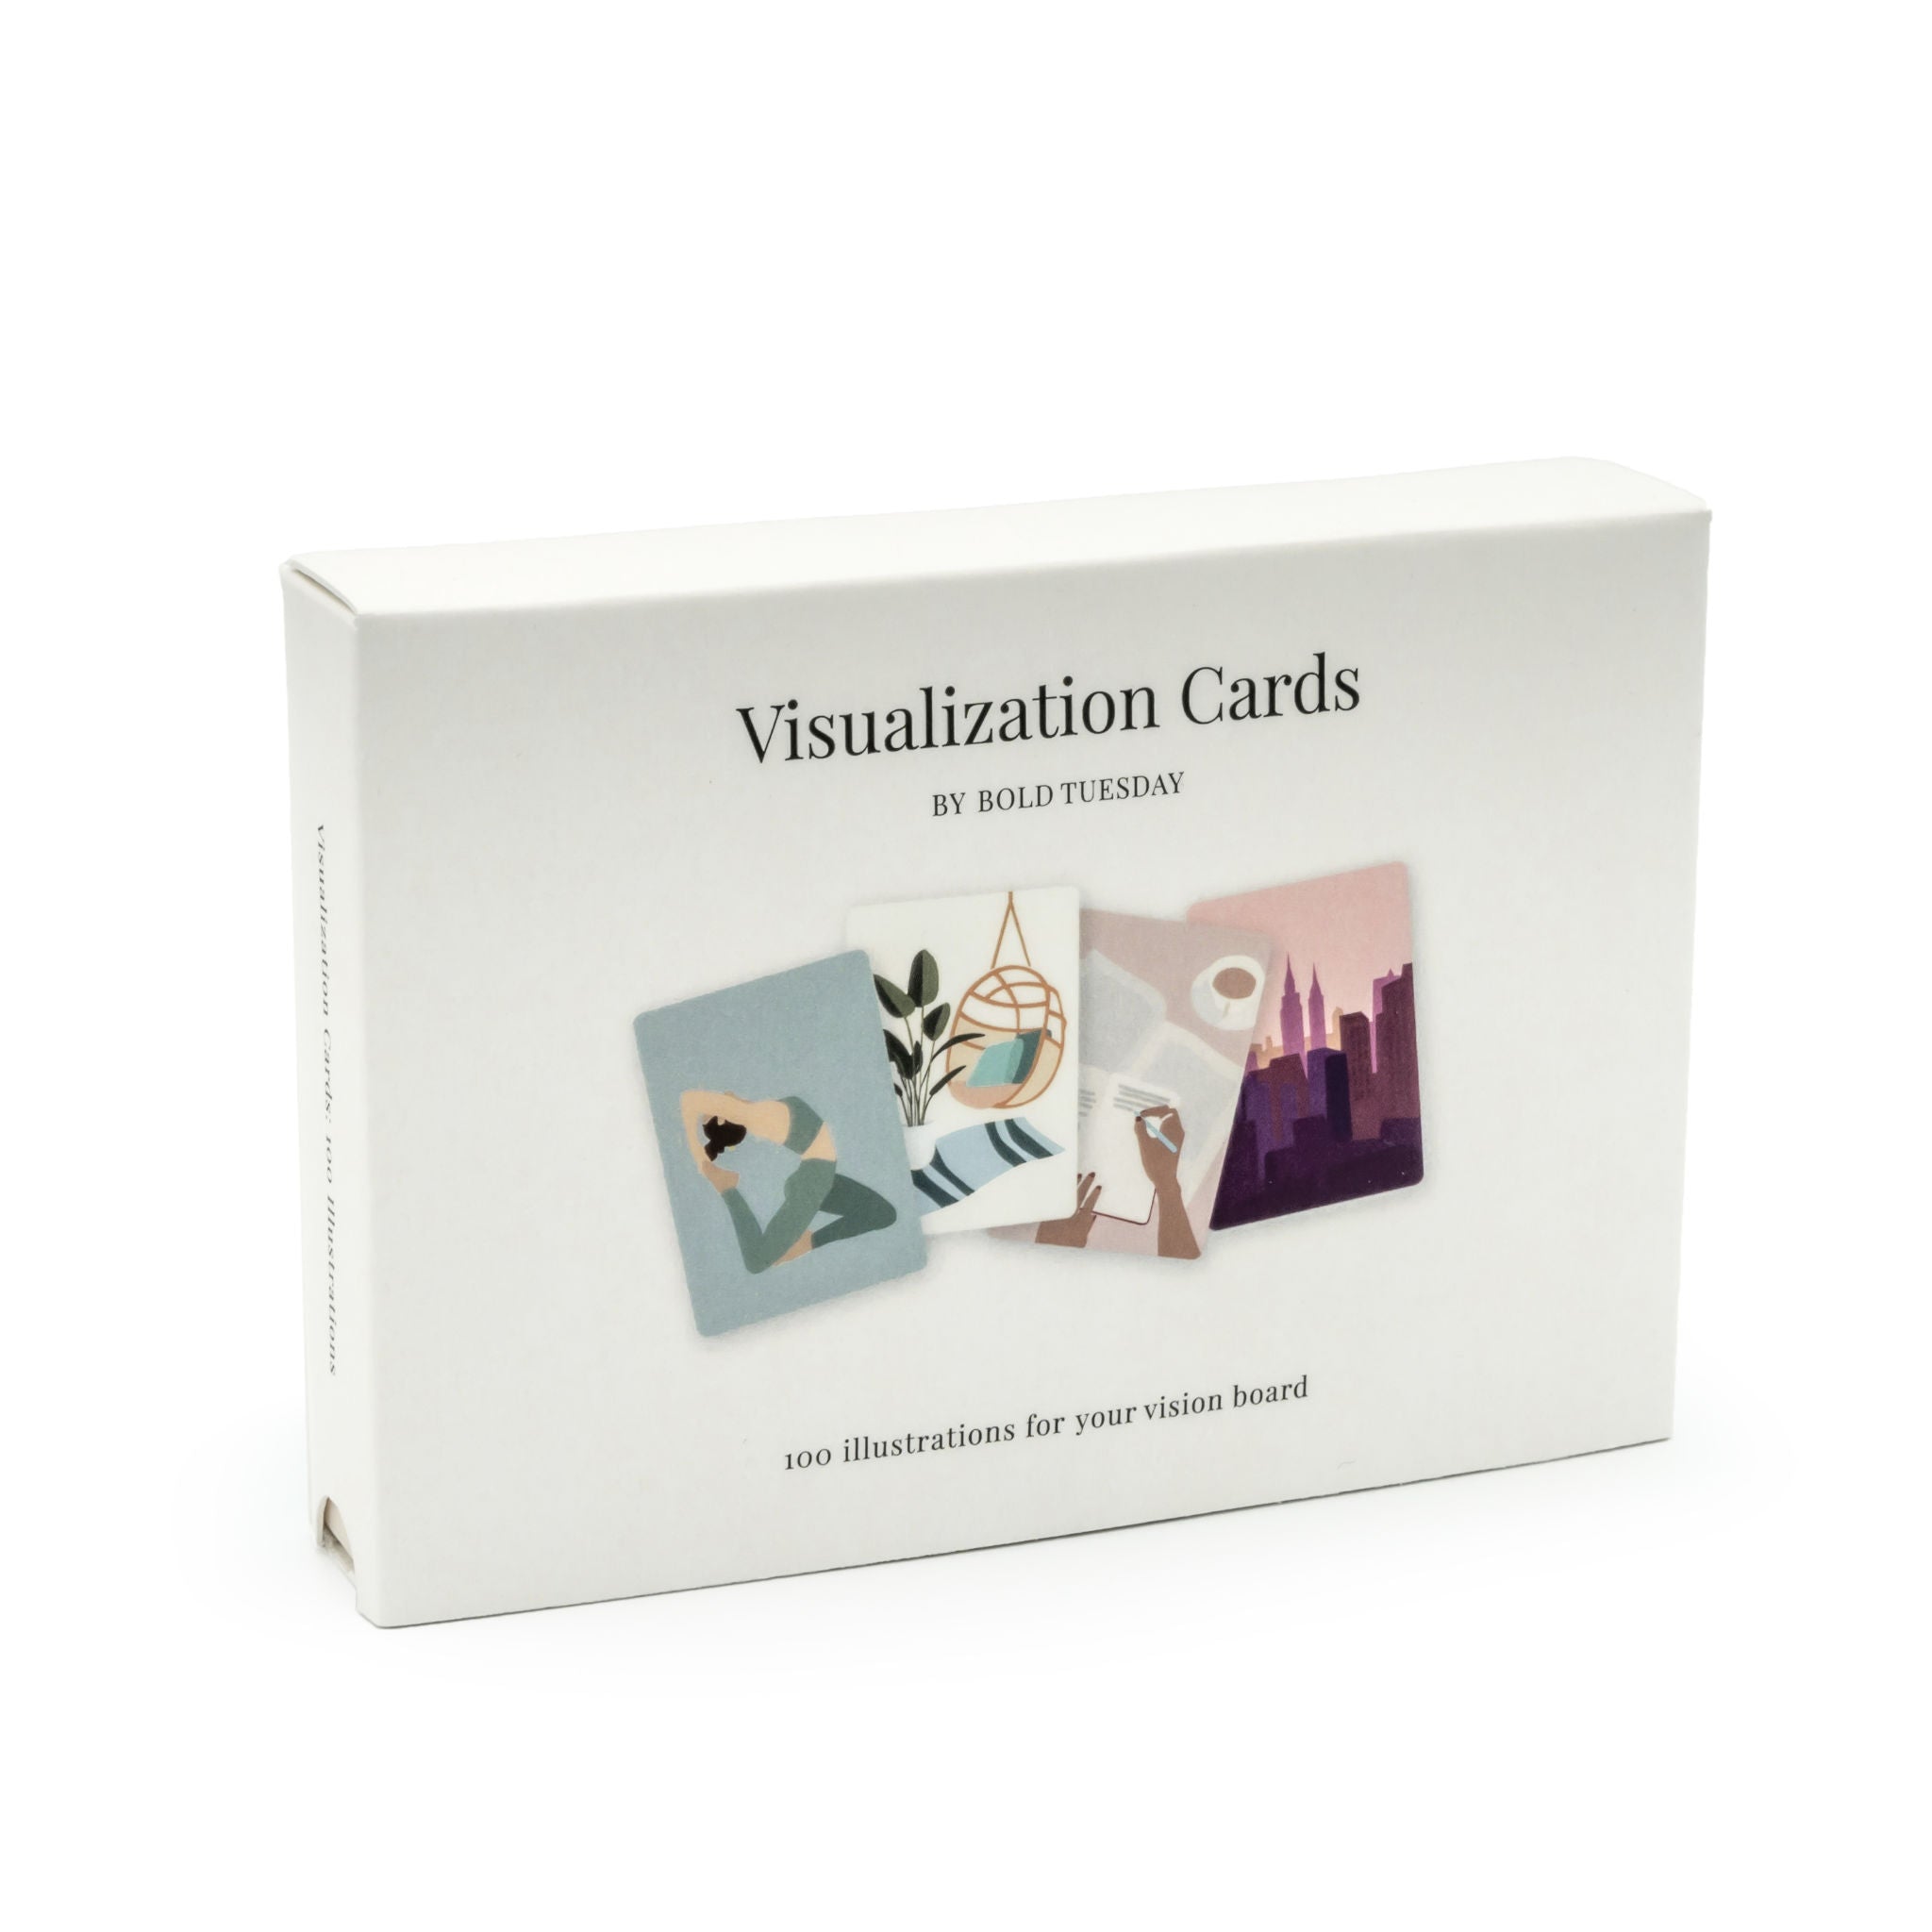 100 Visualization Cards for Your Vision Board